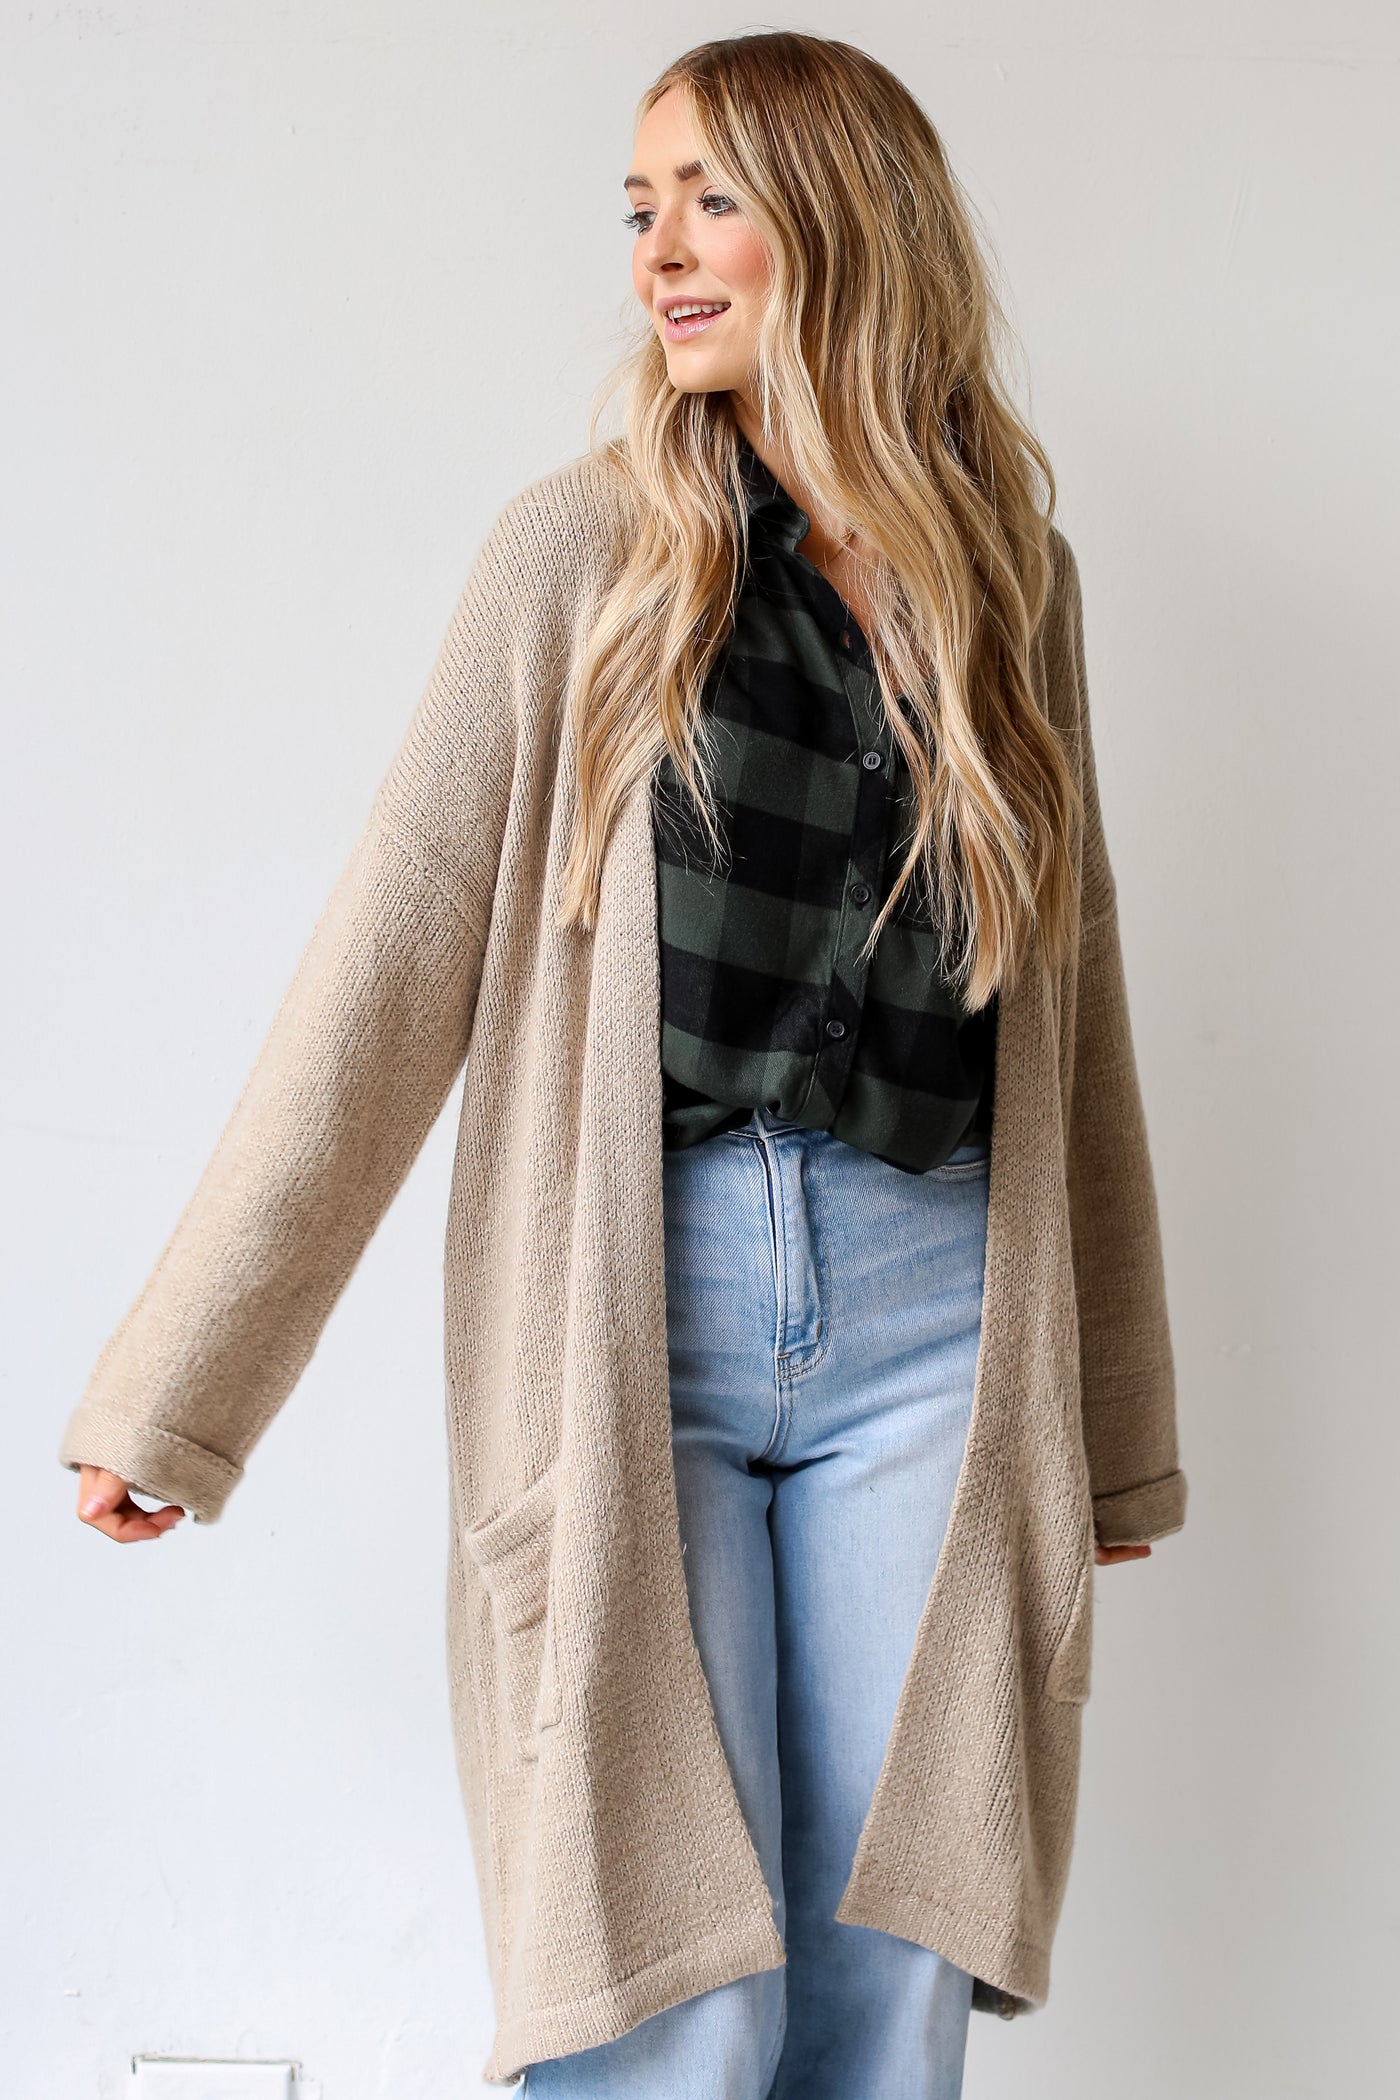 Longline Cardigans for fall